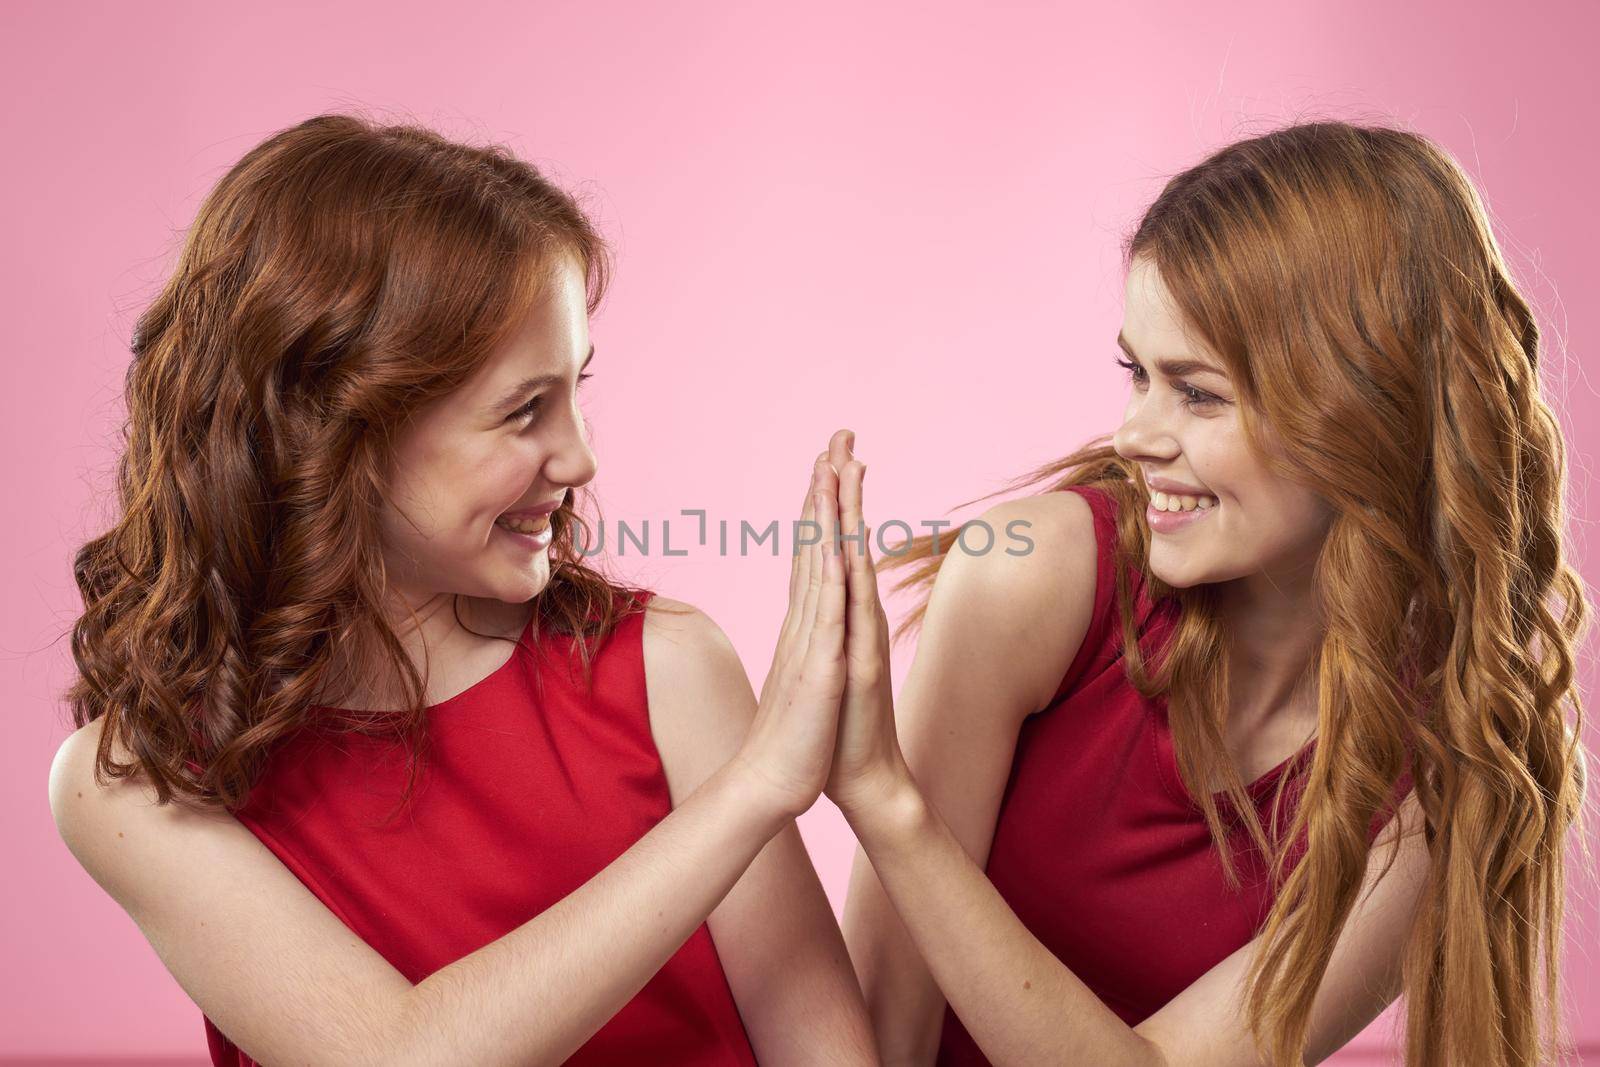 Mom and daughter fun communication family joy pink background cropped view by SHOTPRIME